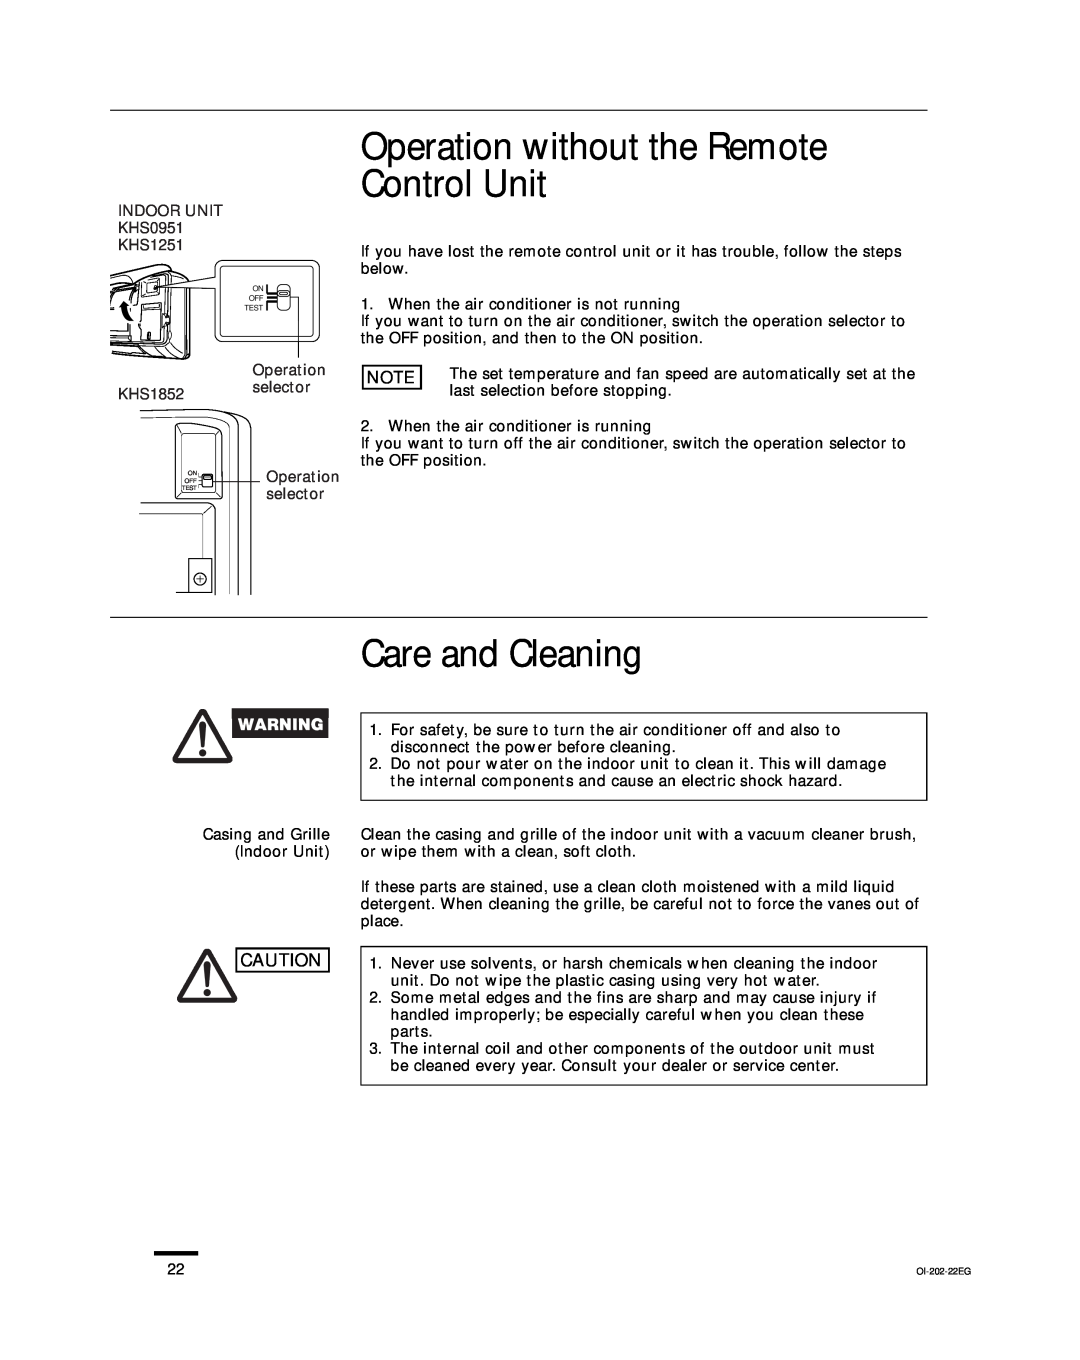 Sanyo CH1852, CH0952, KHS1852-S service manual Operation without the Remote Control Unit, Care and Cleaning 